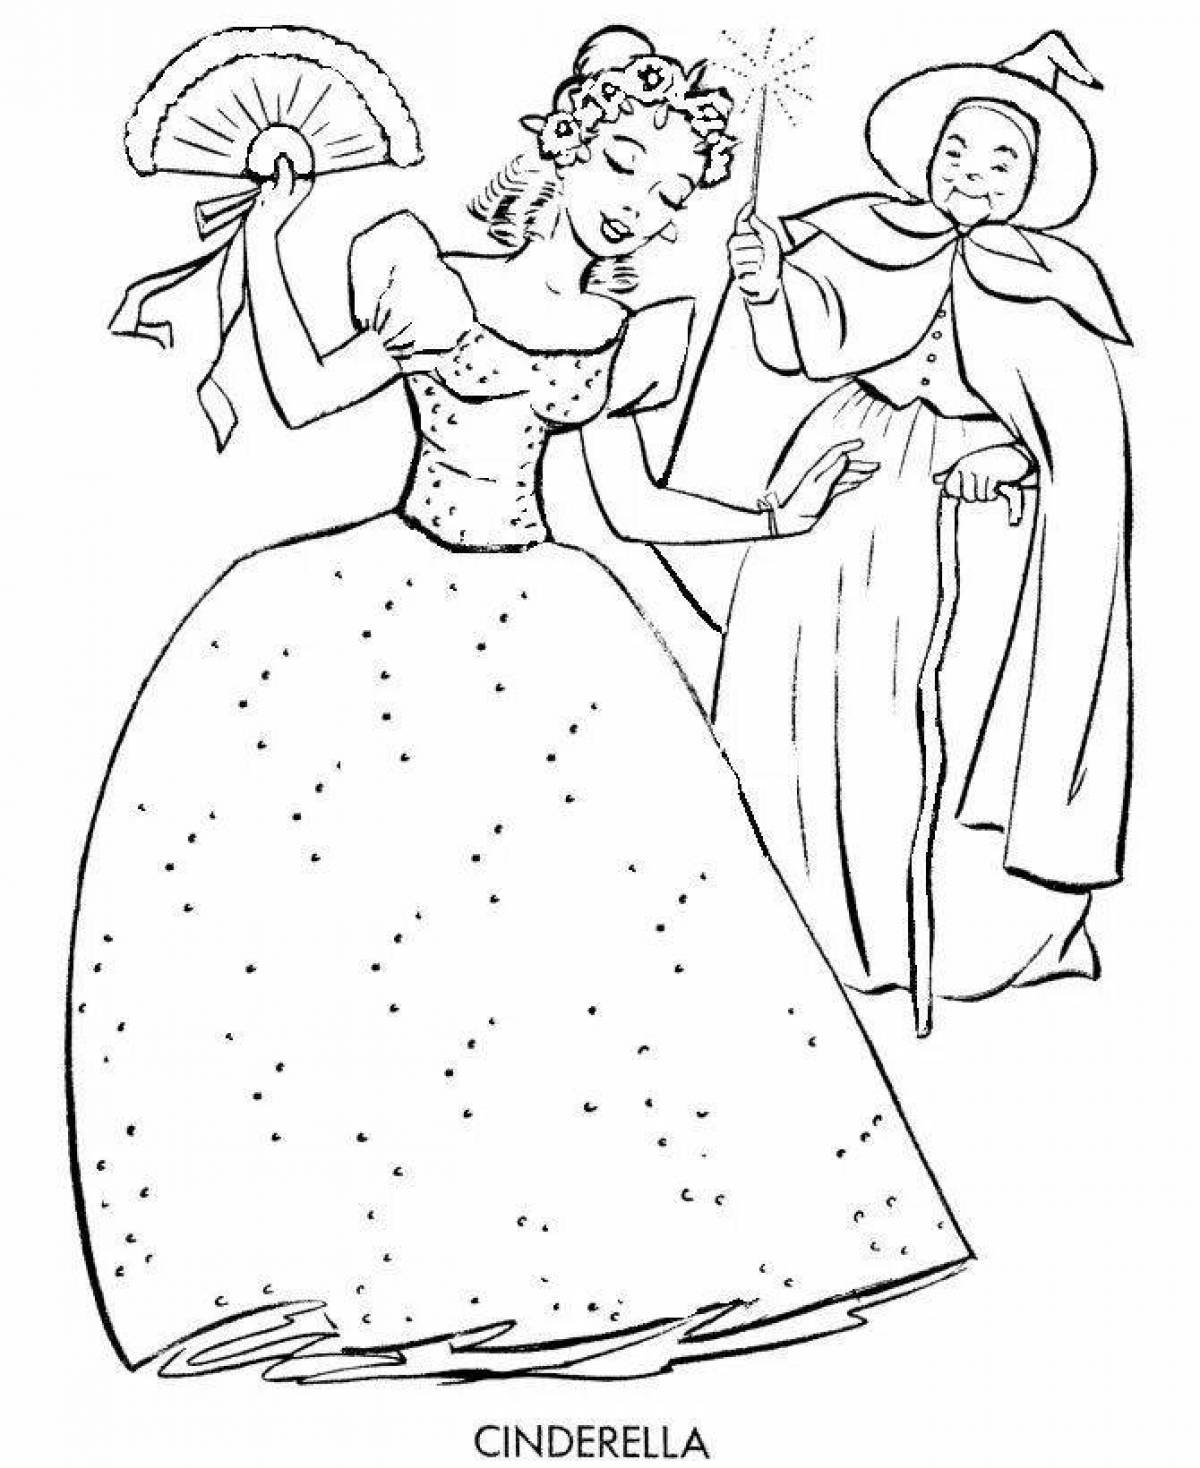 Cinderella and Charles Perrault coloring page